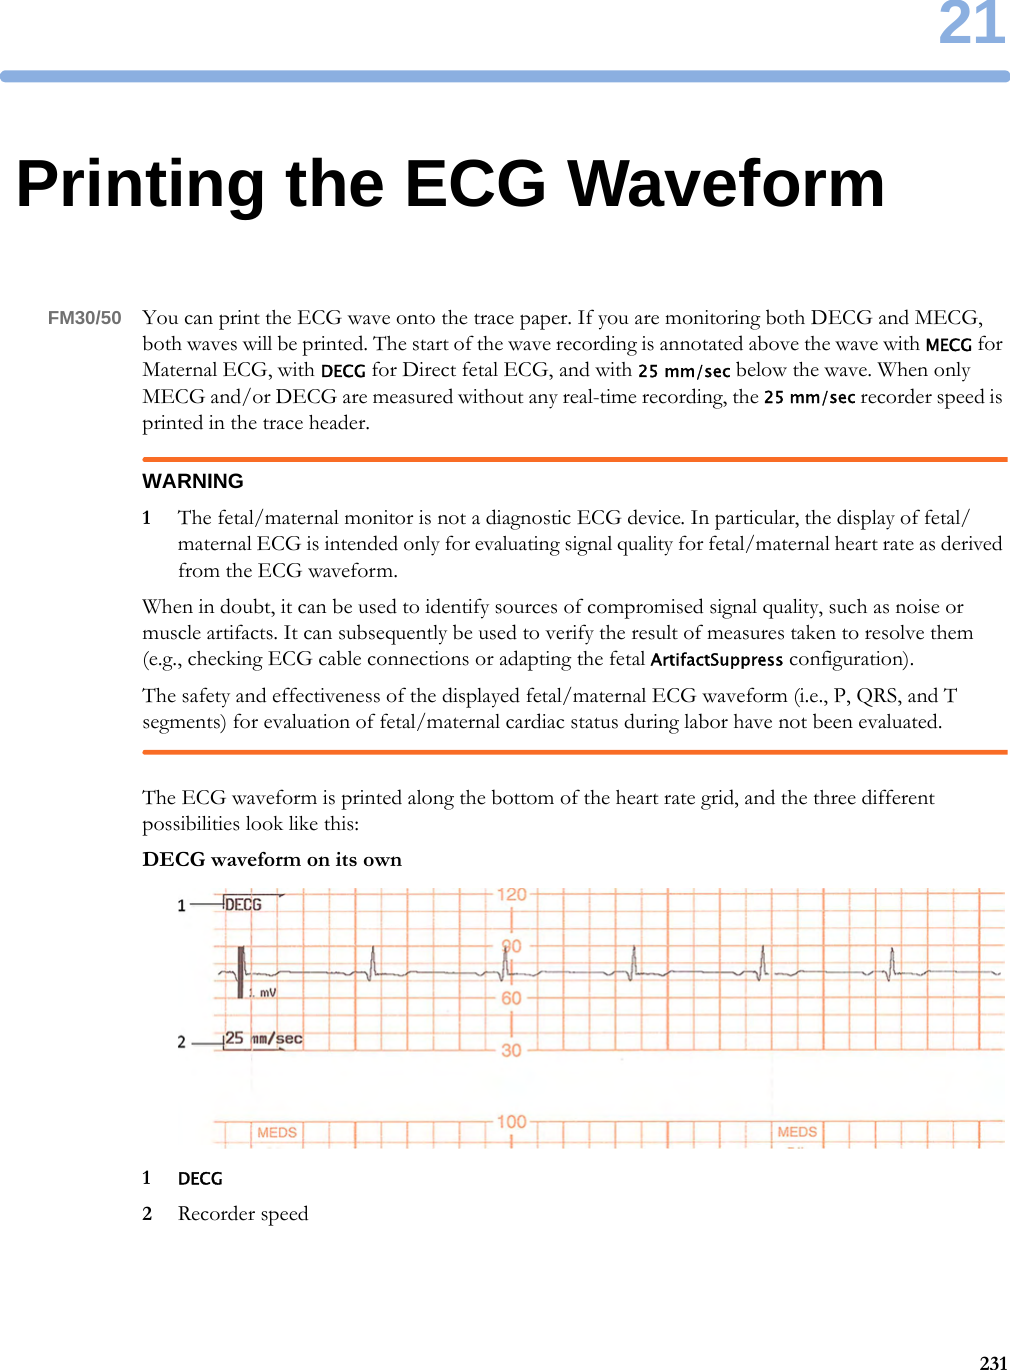 2123121Printing the ECG WaveformFM30/50 You can print the ECG wave onto the trace paper. If you are monitoring both DECG and MECG, both waves will be printed. The start of the wave recording is annotated above the wave with MECG for Maternal ECG, with DECG for Direct fetal ECG, and with 25 mm/sec below the wave. When only MECG and/or DECG are measured without any real-time recording, the 25 mm/sec recorder speed is printed in the trace header.WARNING1The fetal/maternal monitor is not a diagnostic ECG device. In particular, the display of fetal/maternal ECG is intended only for evaluating signal quality for fetal/maternal heart rate as derived from the ECG waveform.When in doubt, it can be used to identify sources of compromised signal quality, such as noise or muscle artifacts. It can subsequently be used to verify the result of measures taken to resolve them (e.g., checking ECG cable connections or adapting the fetal ArtifactSuppress configuration).The safety and effectiveness of the displayed fetal/maternal ECG waveform (i.e., P, QRS, and T segments) for evaluation of fetal/maternal cardiac status during labor have not been evaluated.The ECG waveform is printed along the bottom of the heart rate grid, and the three different possibilities look like this:DECG waveform on its own1DECG2Recorder speed